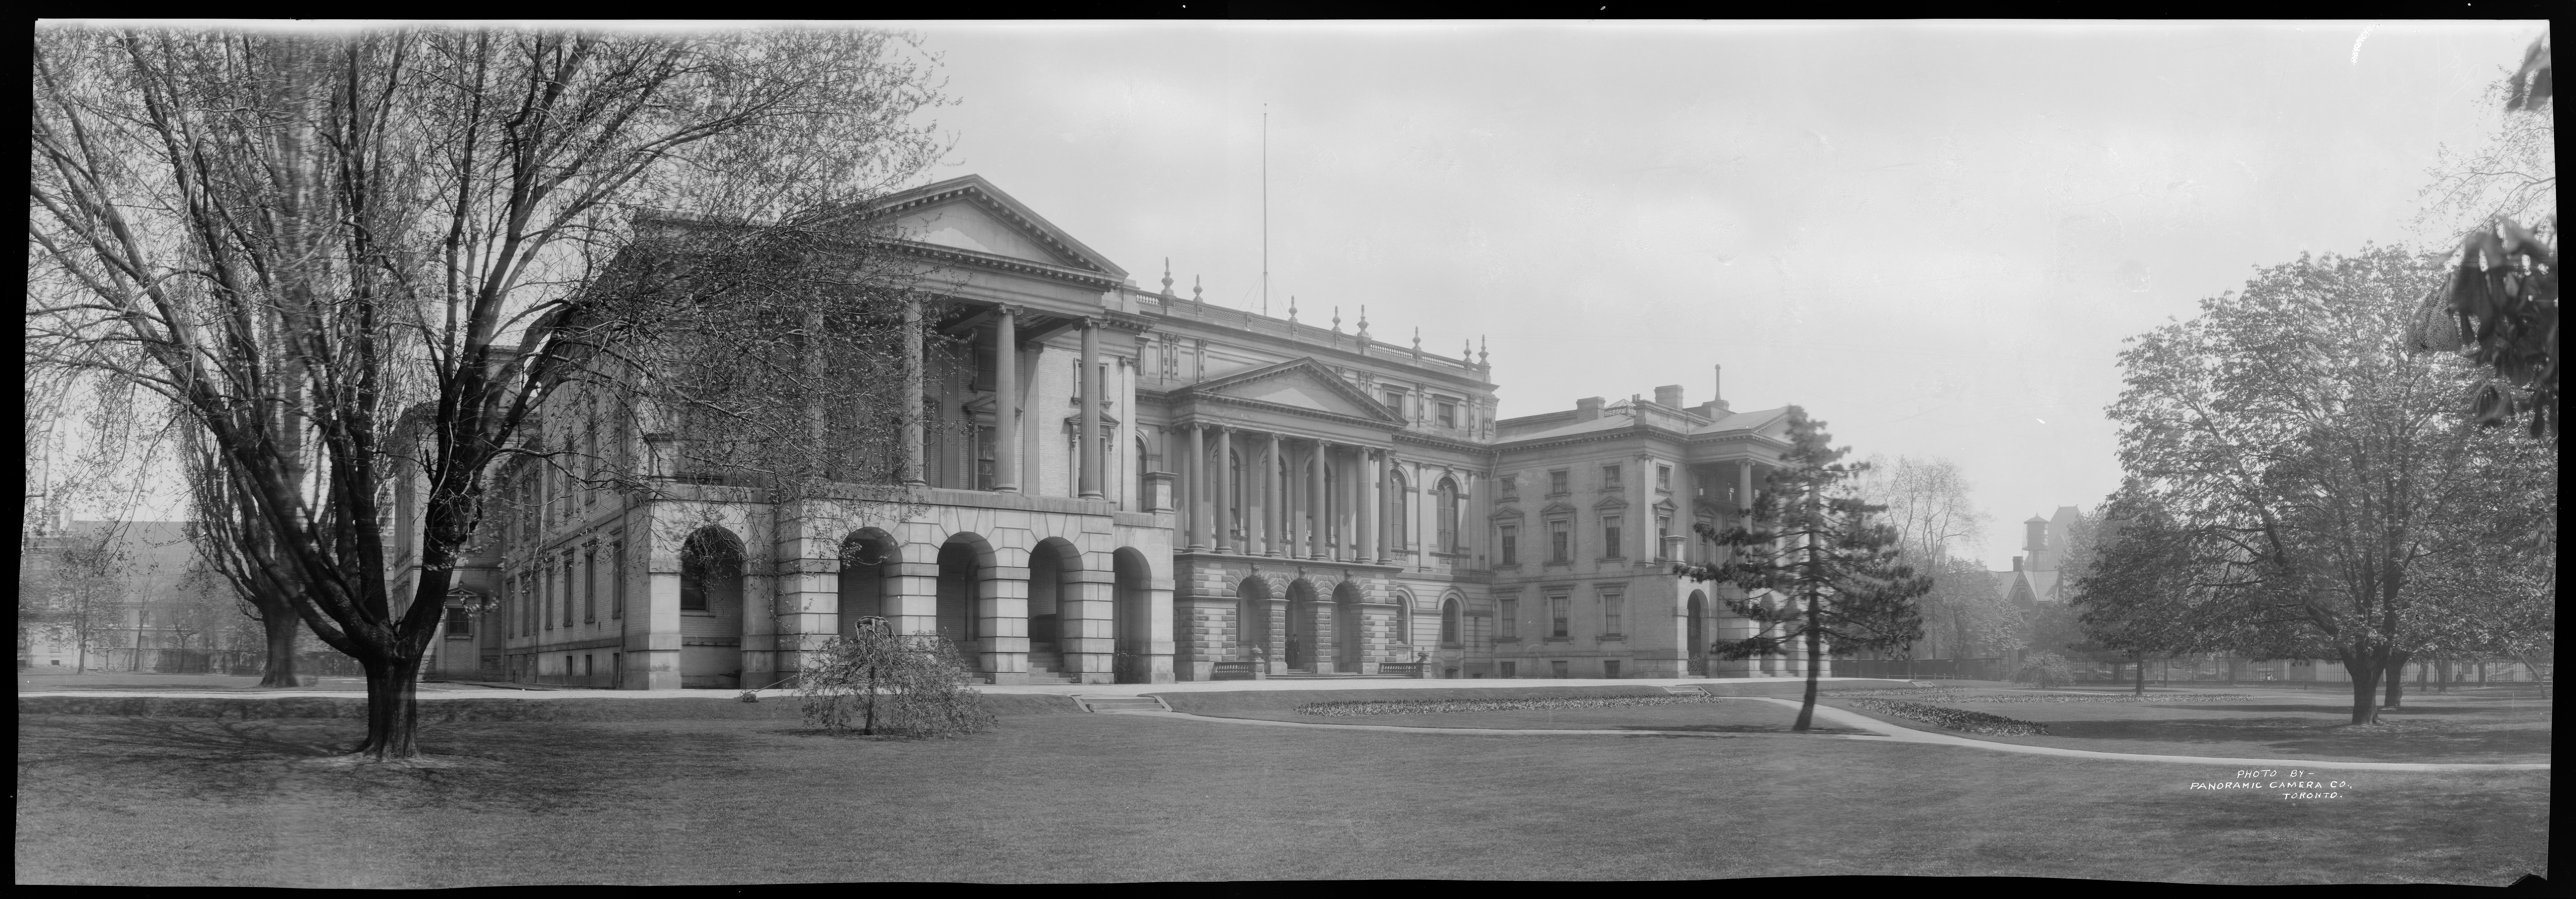 Osgoode Hall (1907) - Courtesy of Archives Ontario